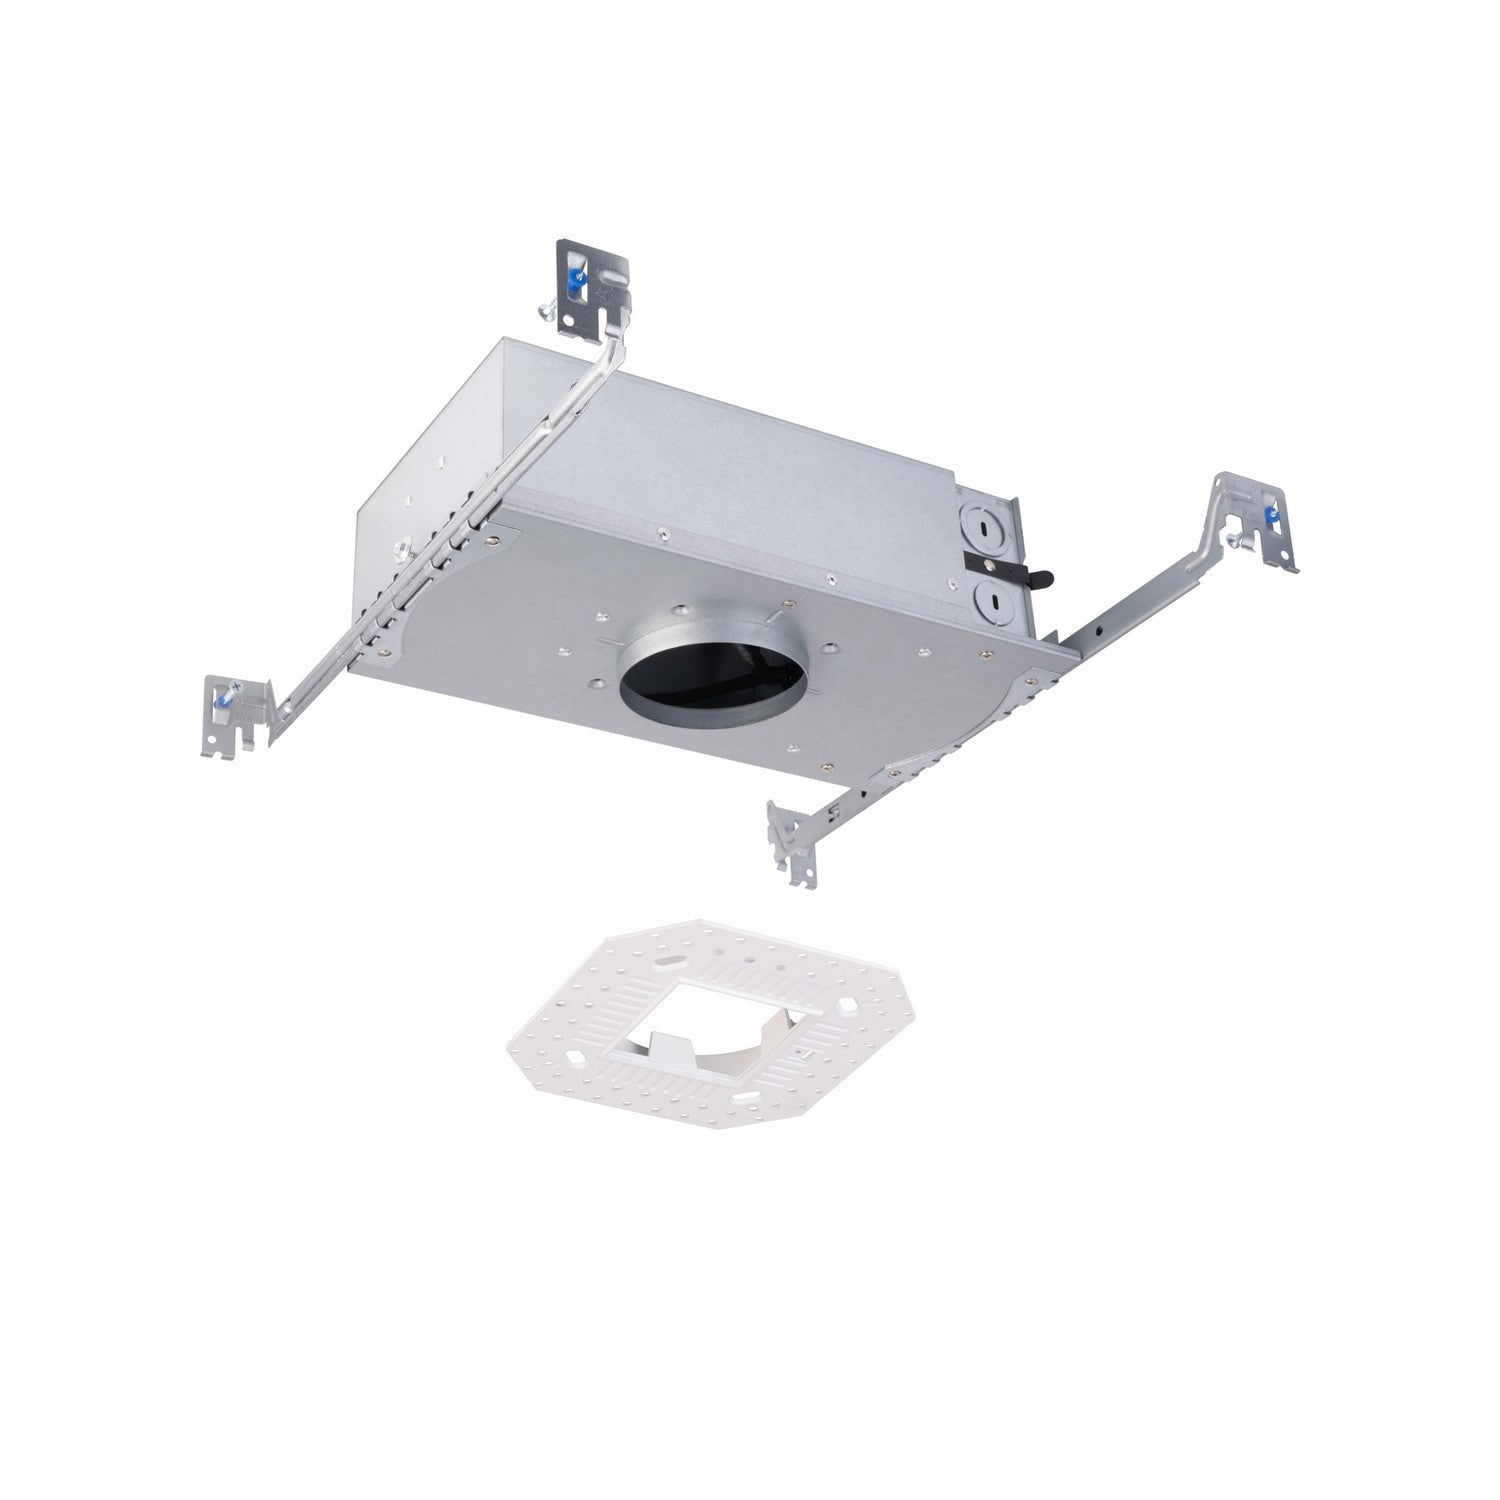 W.A.C. Canada - New Const HSG Square Trimless - 2In Fq Shallow- Union Lighting Luminaires Decor